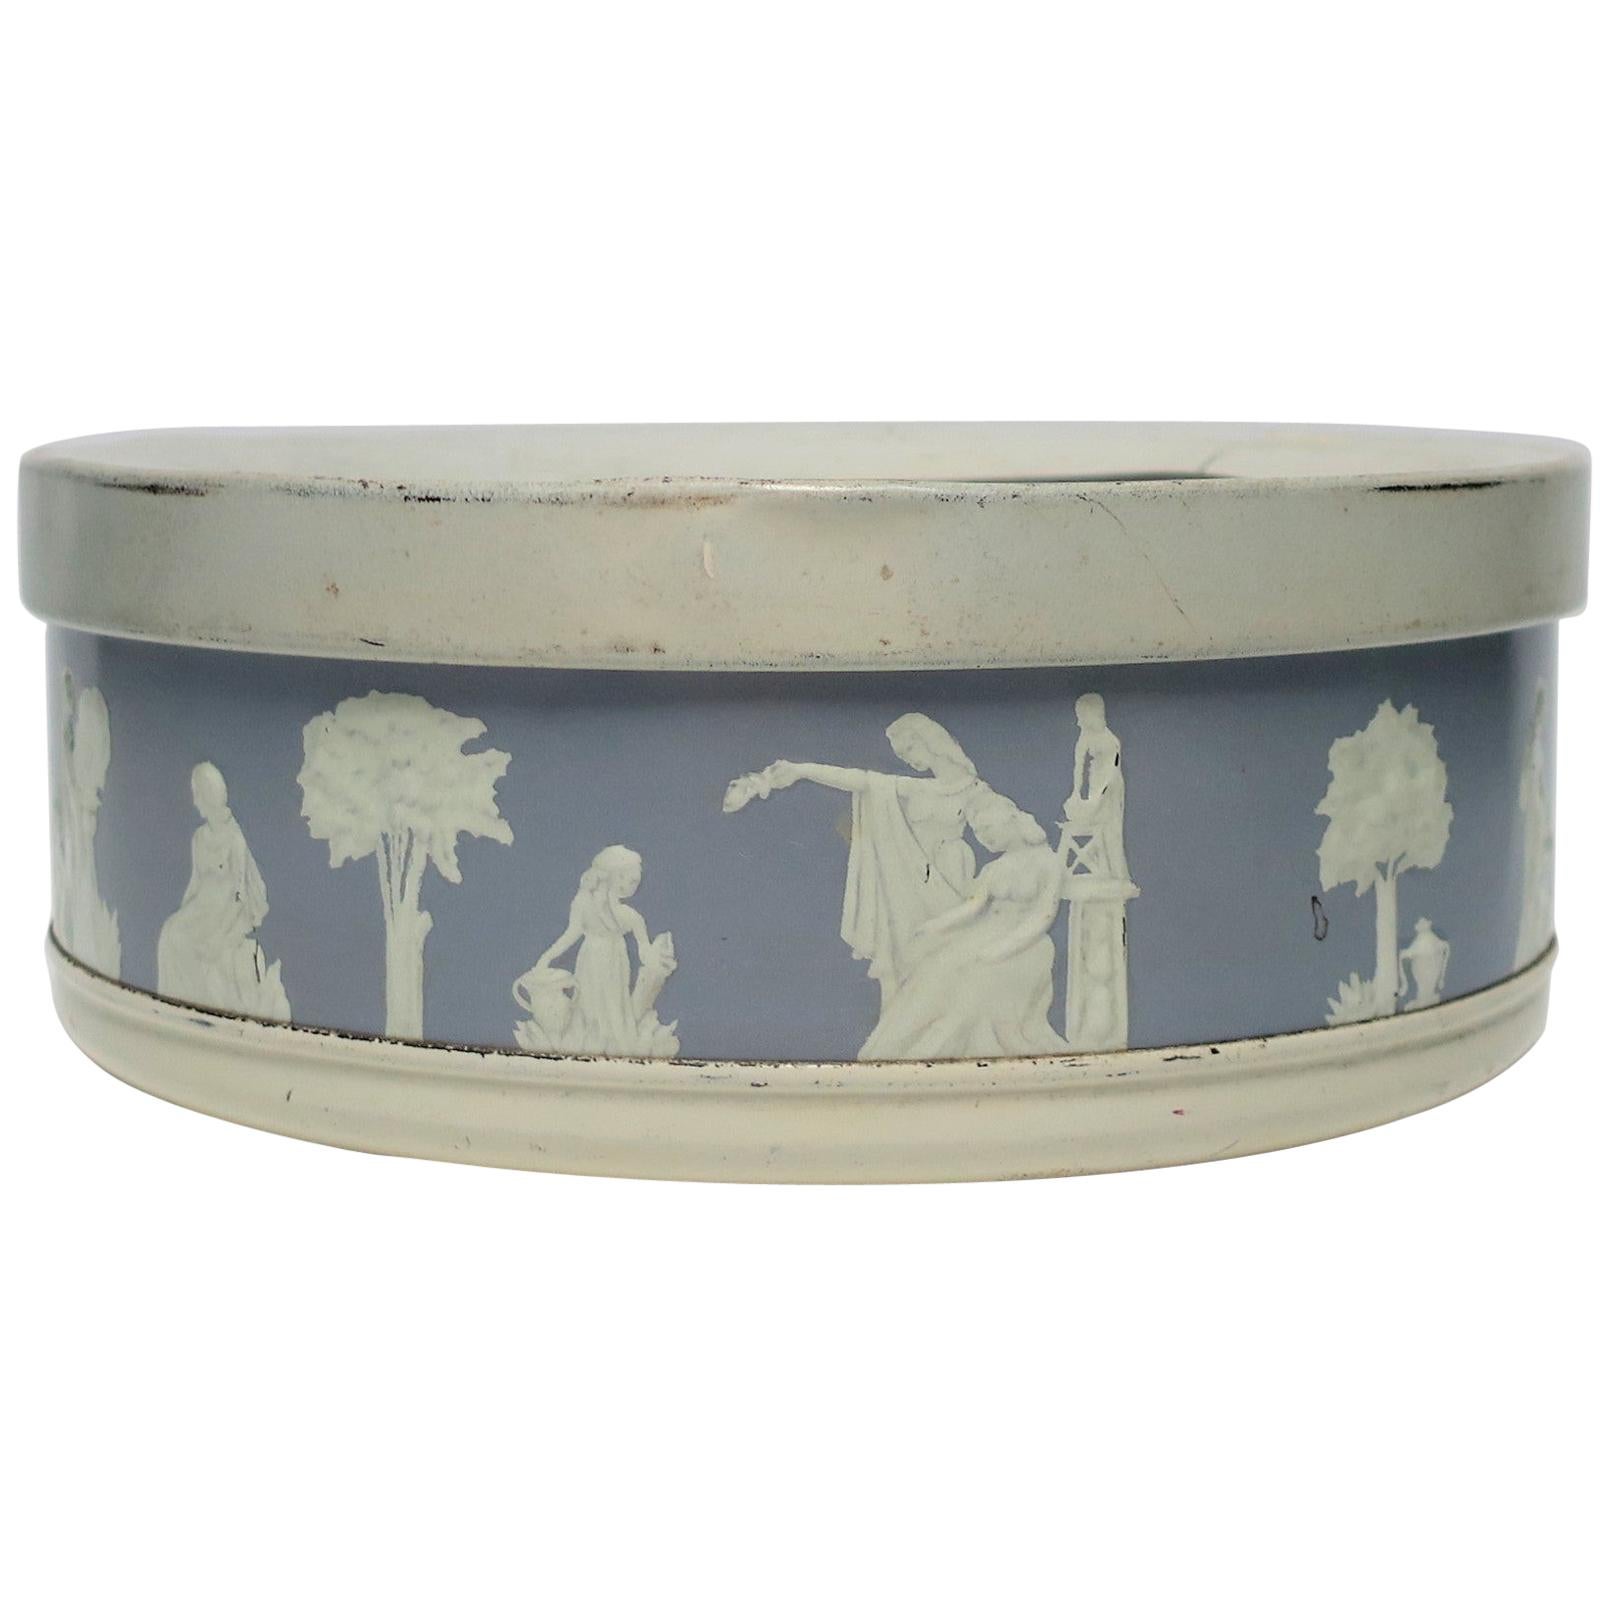 Neoclassical Round Box in the Style of the Wedgwood